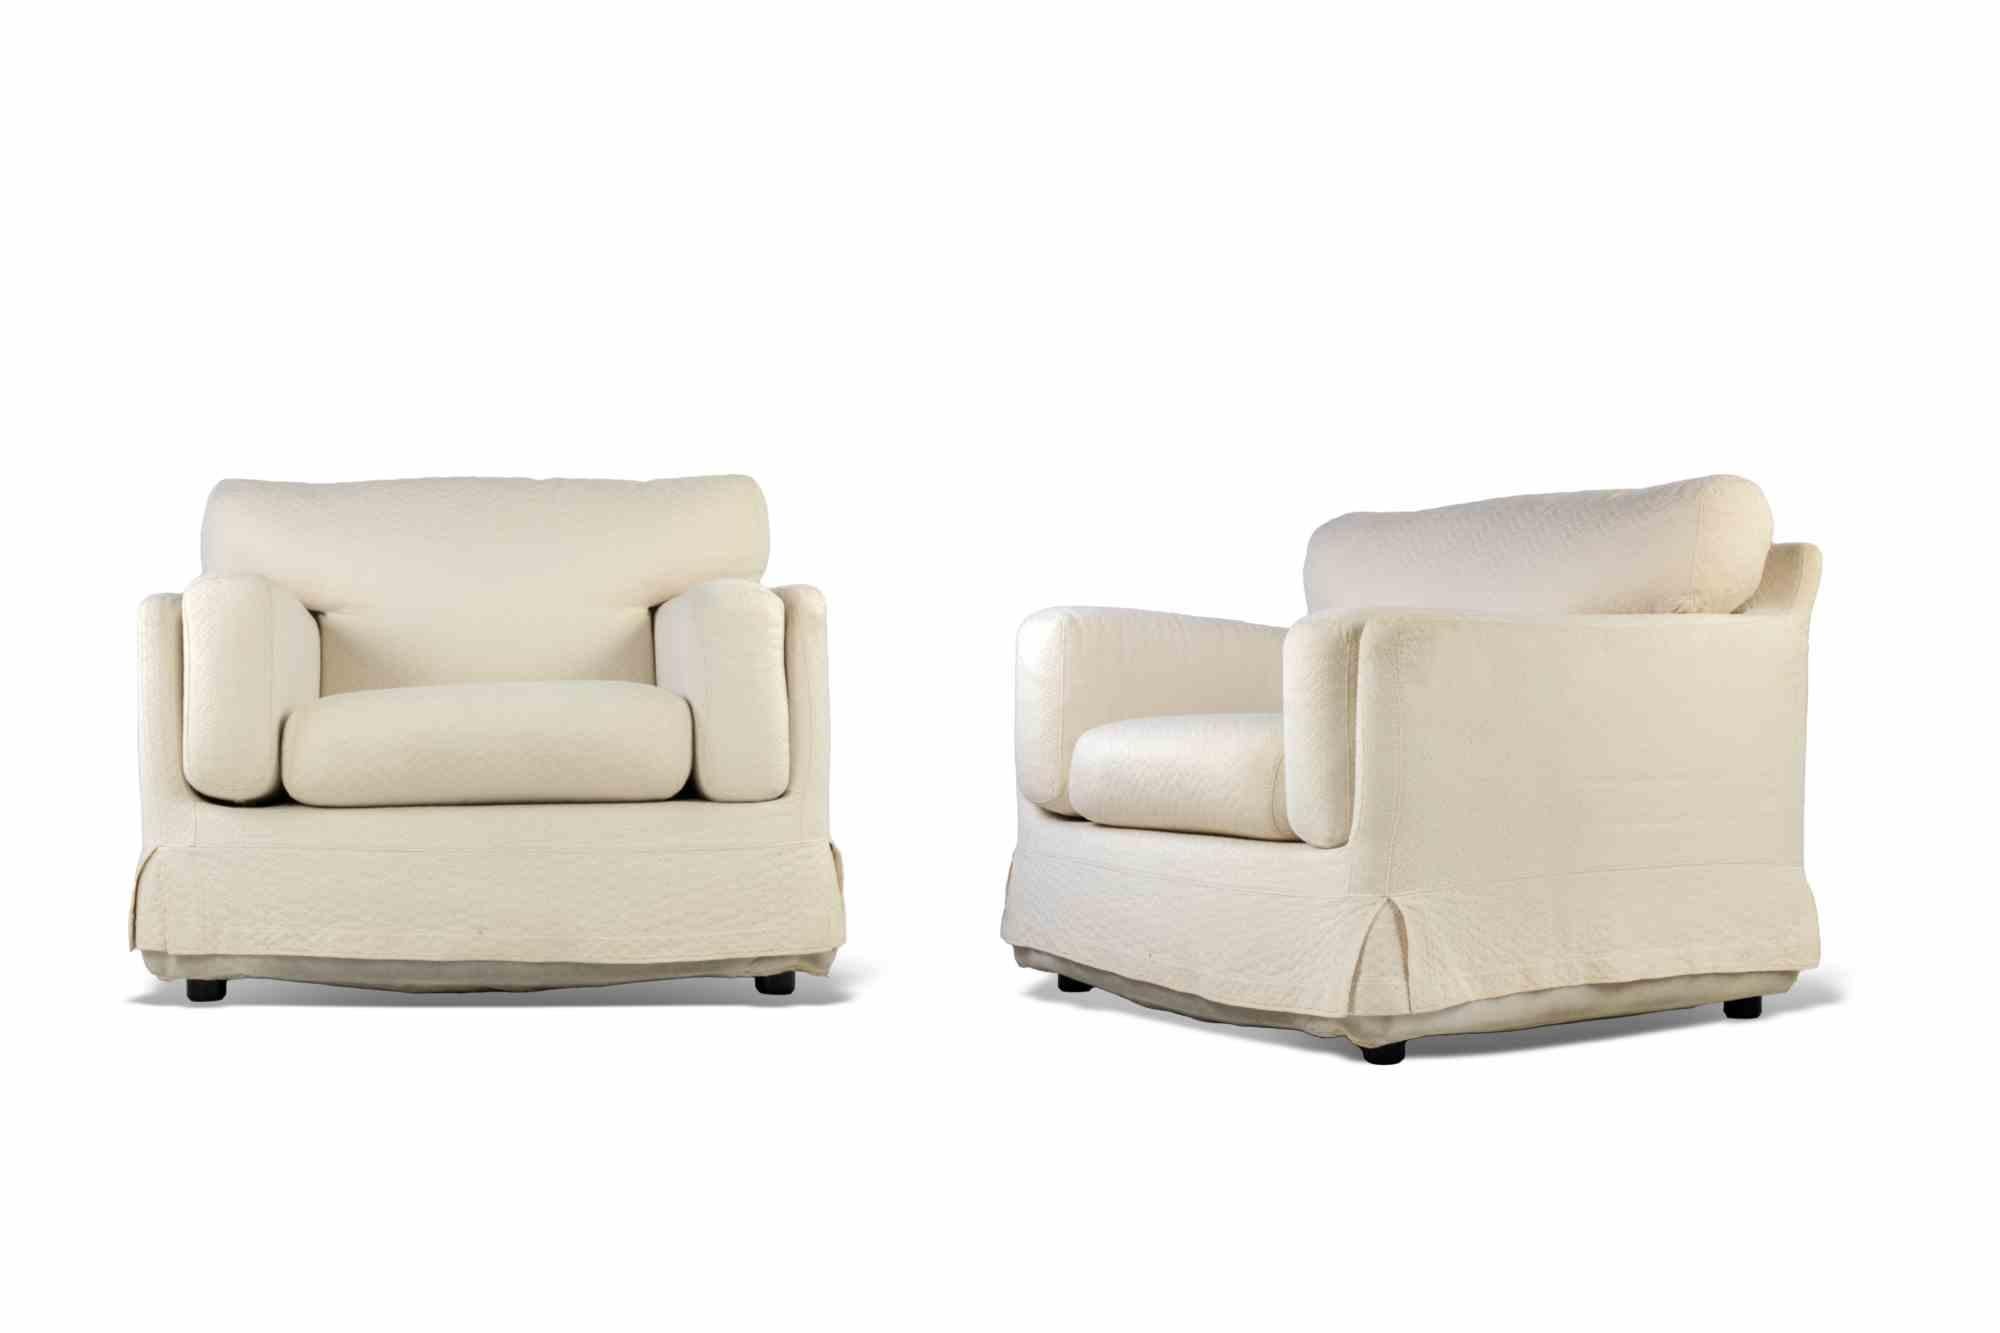 Vintage Sofa and armchair set is a 70s set.

White original fabric. 

Dimensions: Sof, 220 L x 80 H x 90 D cm; Armchair L 102 x H 80 x 93 D cm.

Good conditions, slight yellowing of the fabric, due to time.      

